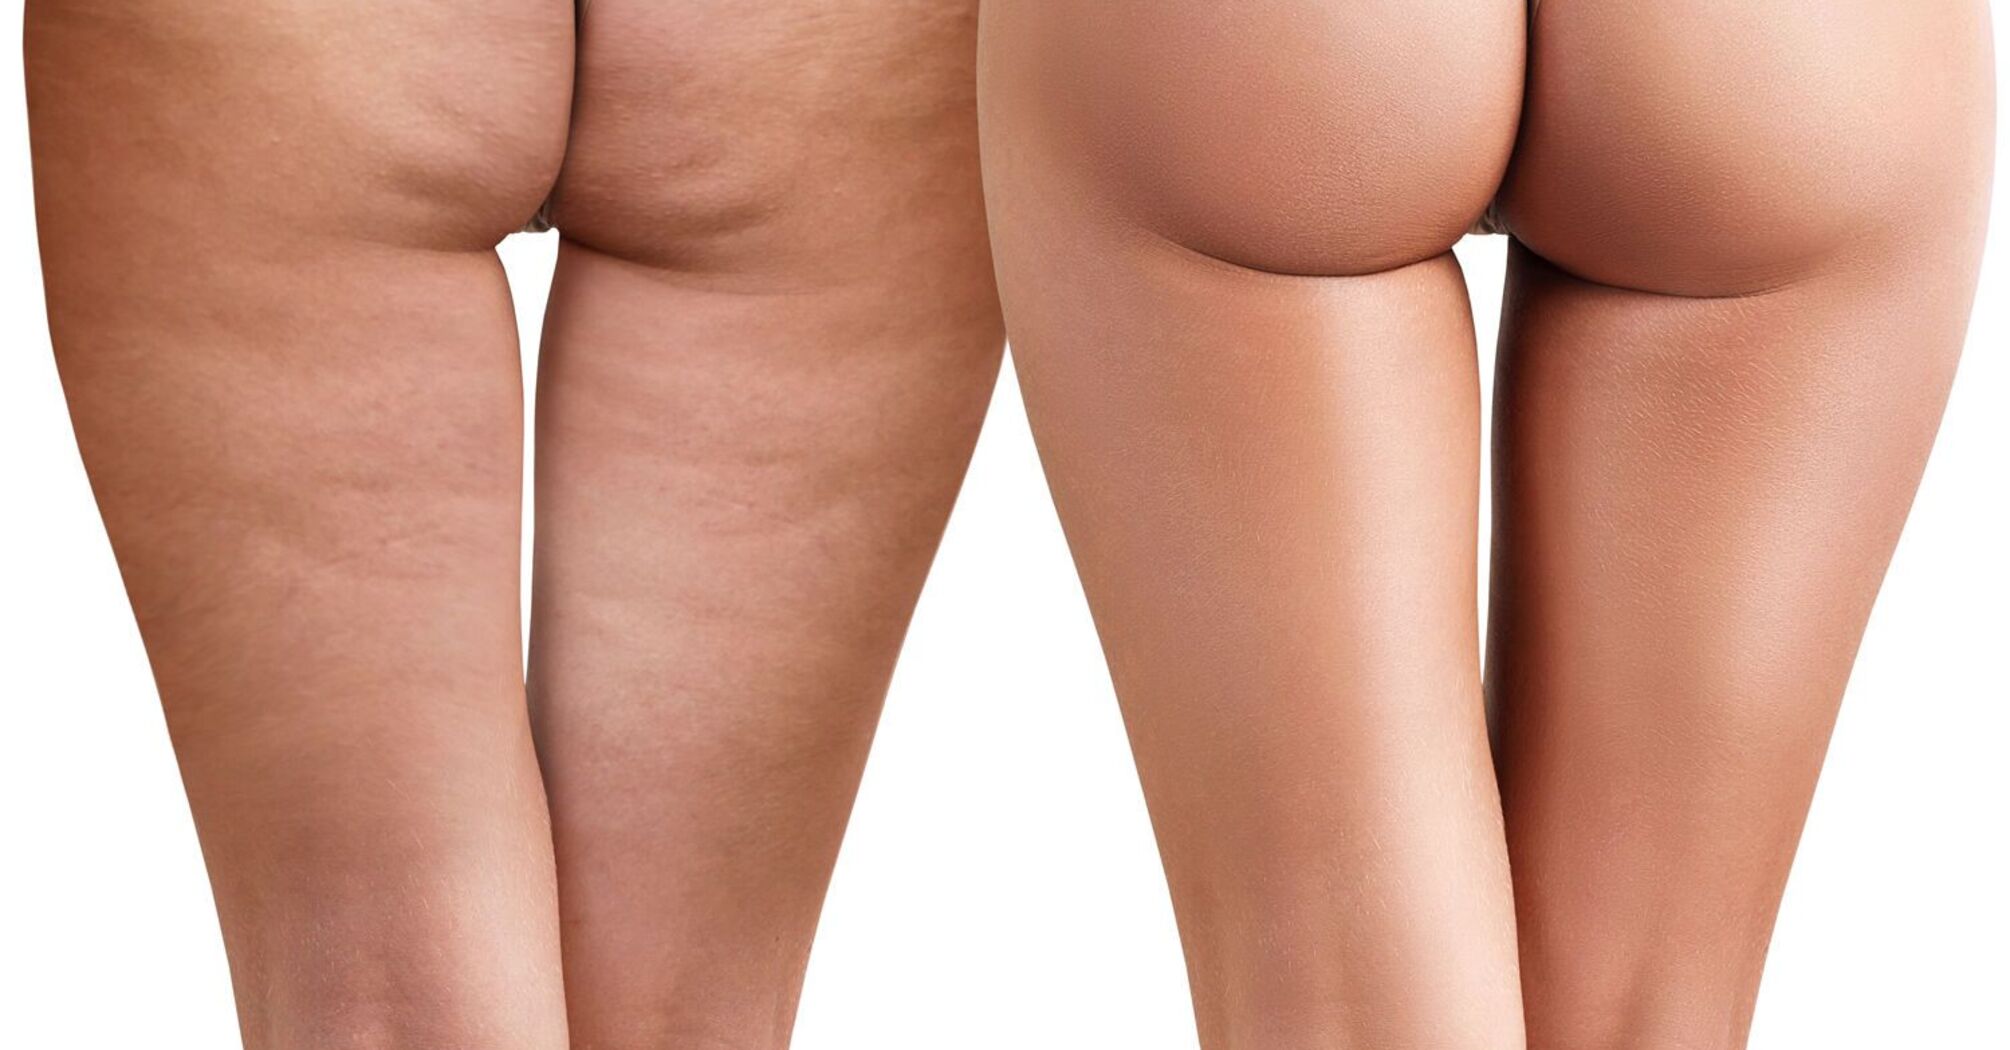 How to reduce cellulite and improve skin condition